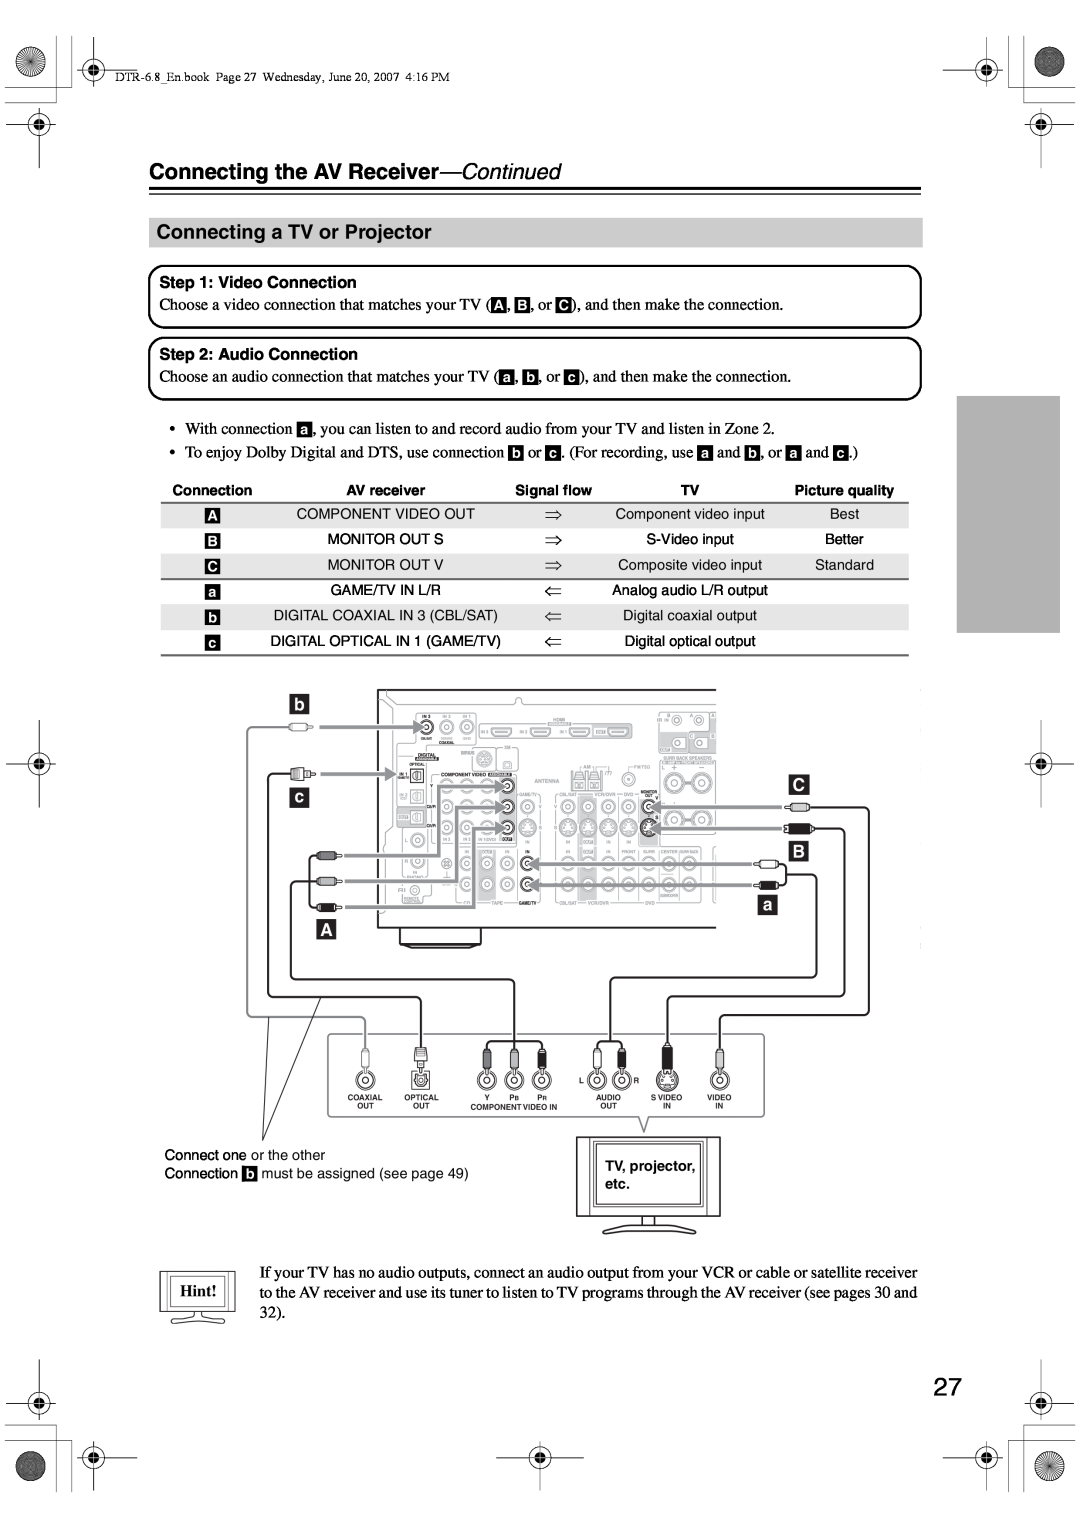 Integra DTR-6.8 instruction manual Connecting a TV or Projector, Hint, Connecting the AV Receiver—Continued 